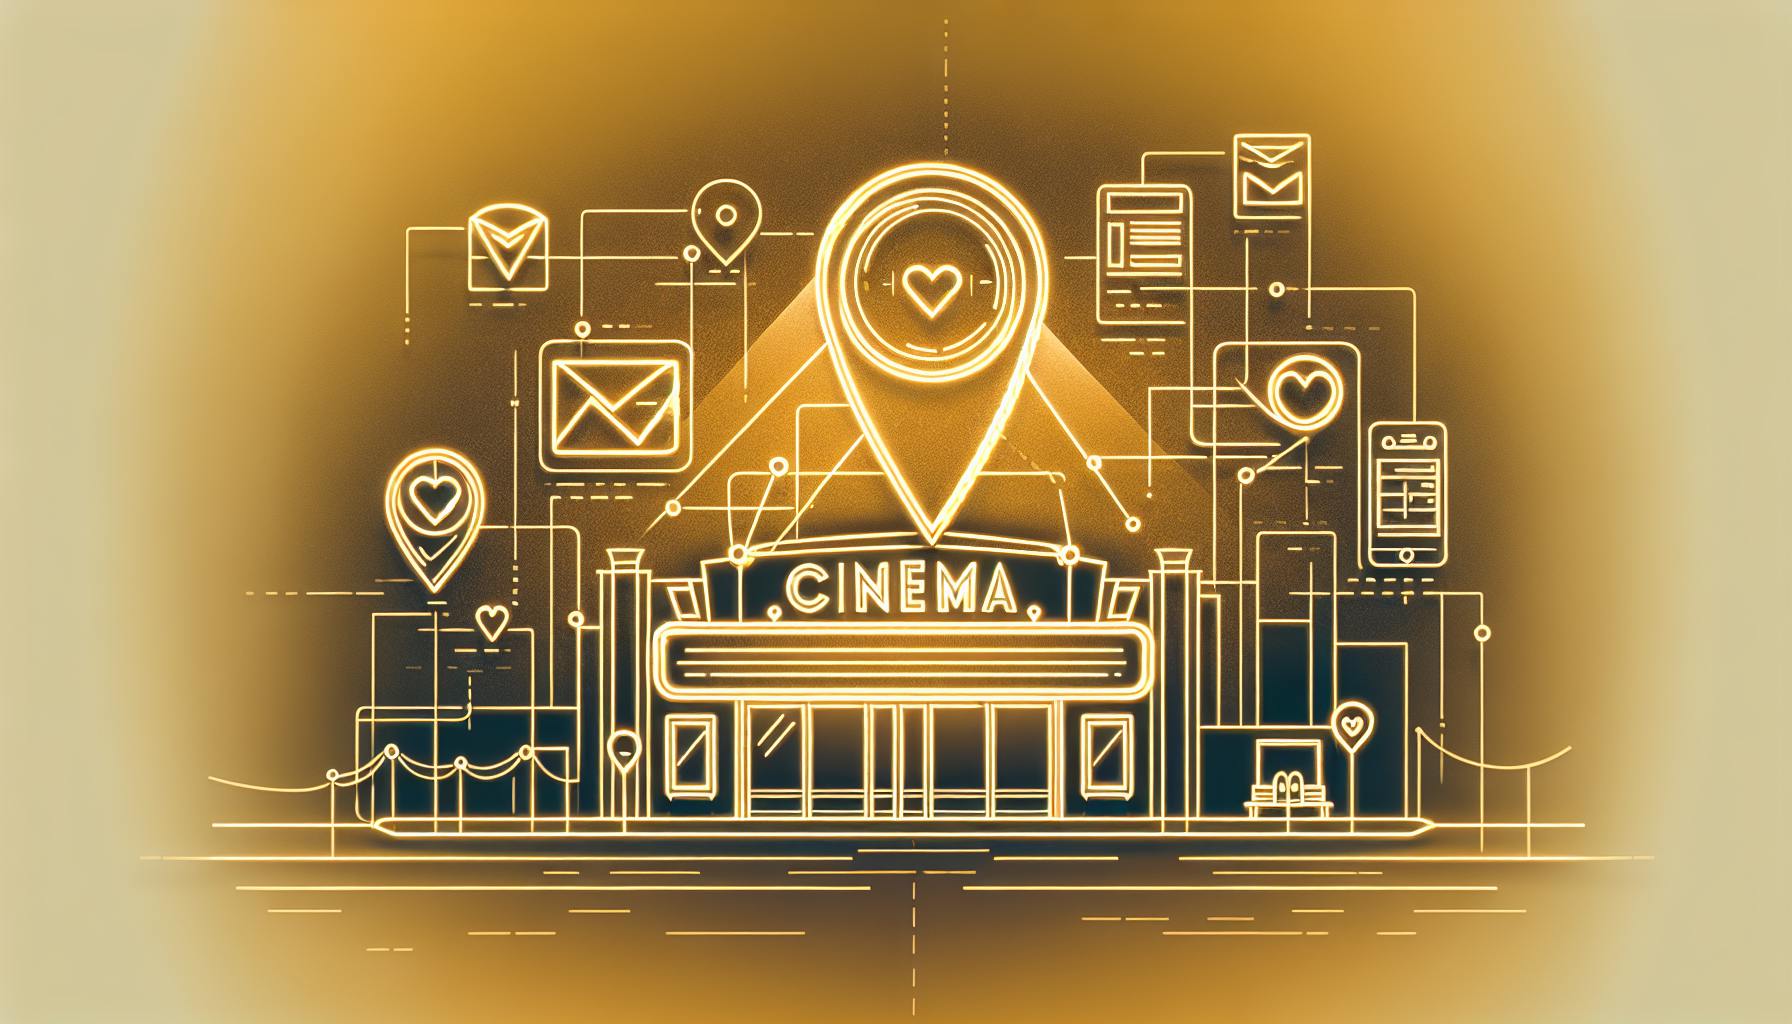 Movie Times Near Me: Enhancing Search Visibility